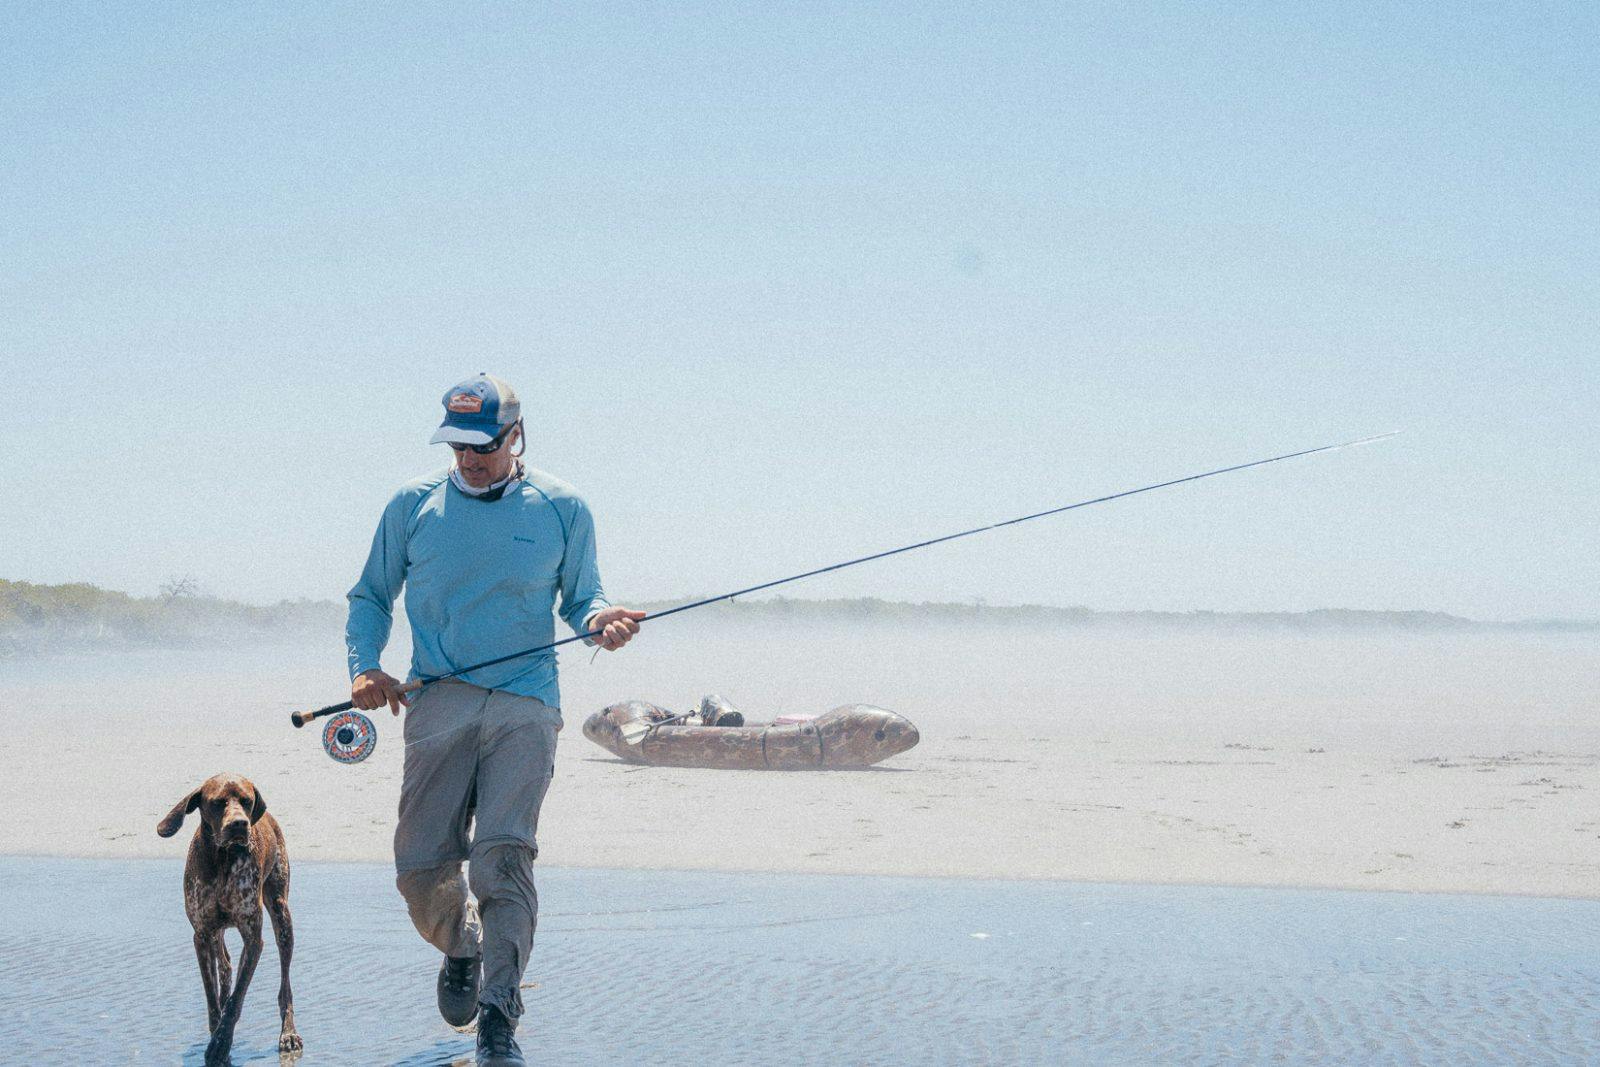 Paolo Marchesi Renews a Sense of Trust &amp; Appreciation for Others While Fly Fishing in Remote Regions of Baja